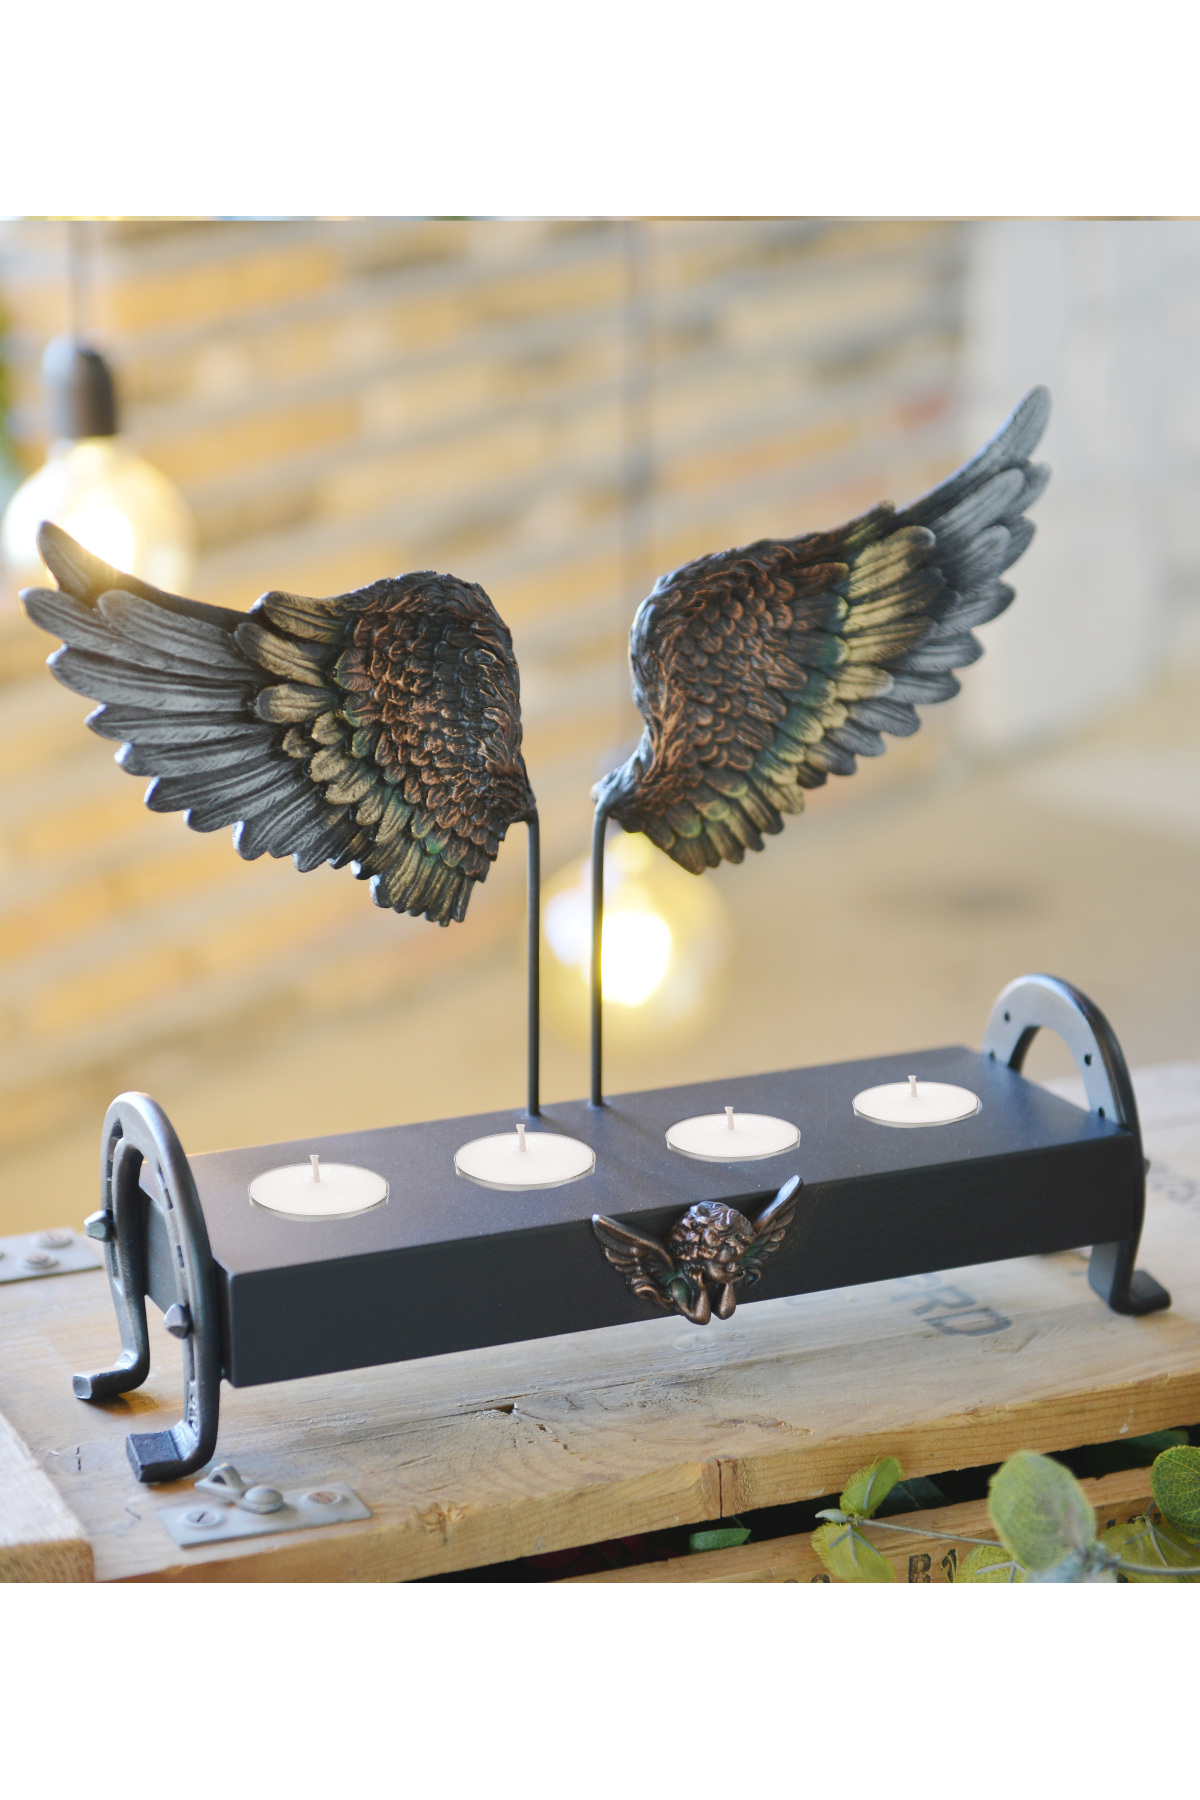 SPECIAL DESIGN ANGEL WINGS 4 PIECE CANDLE HOLDER Trinket